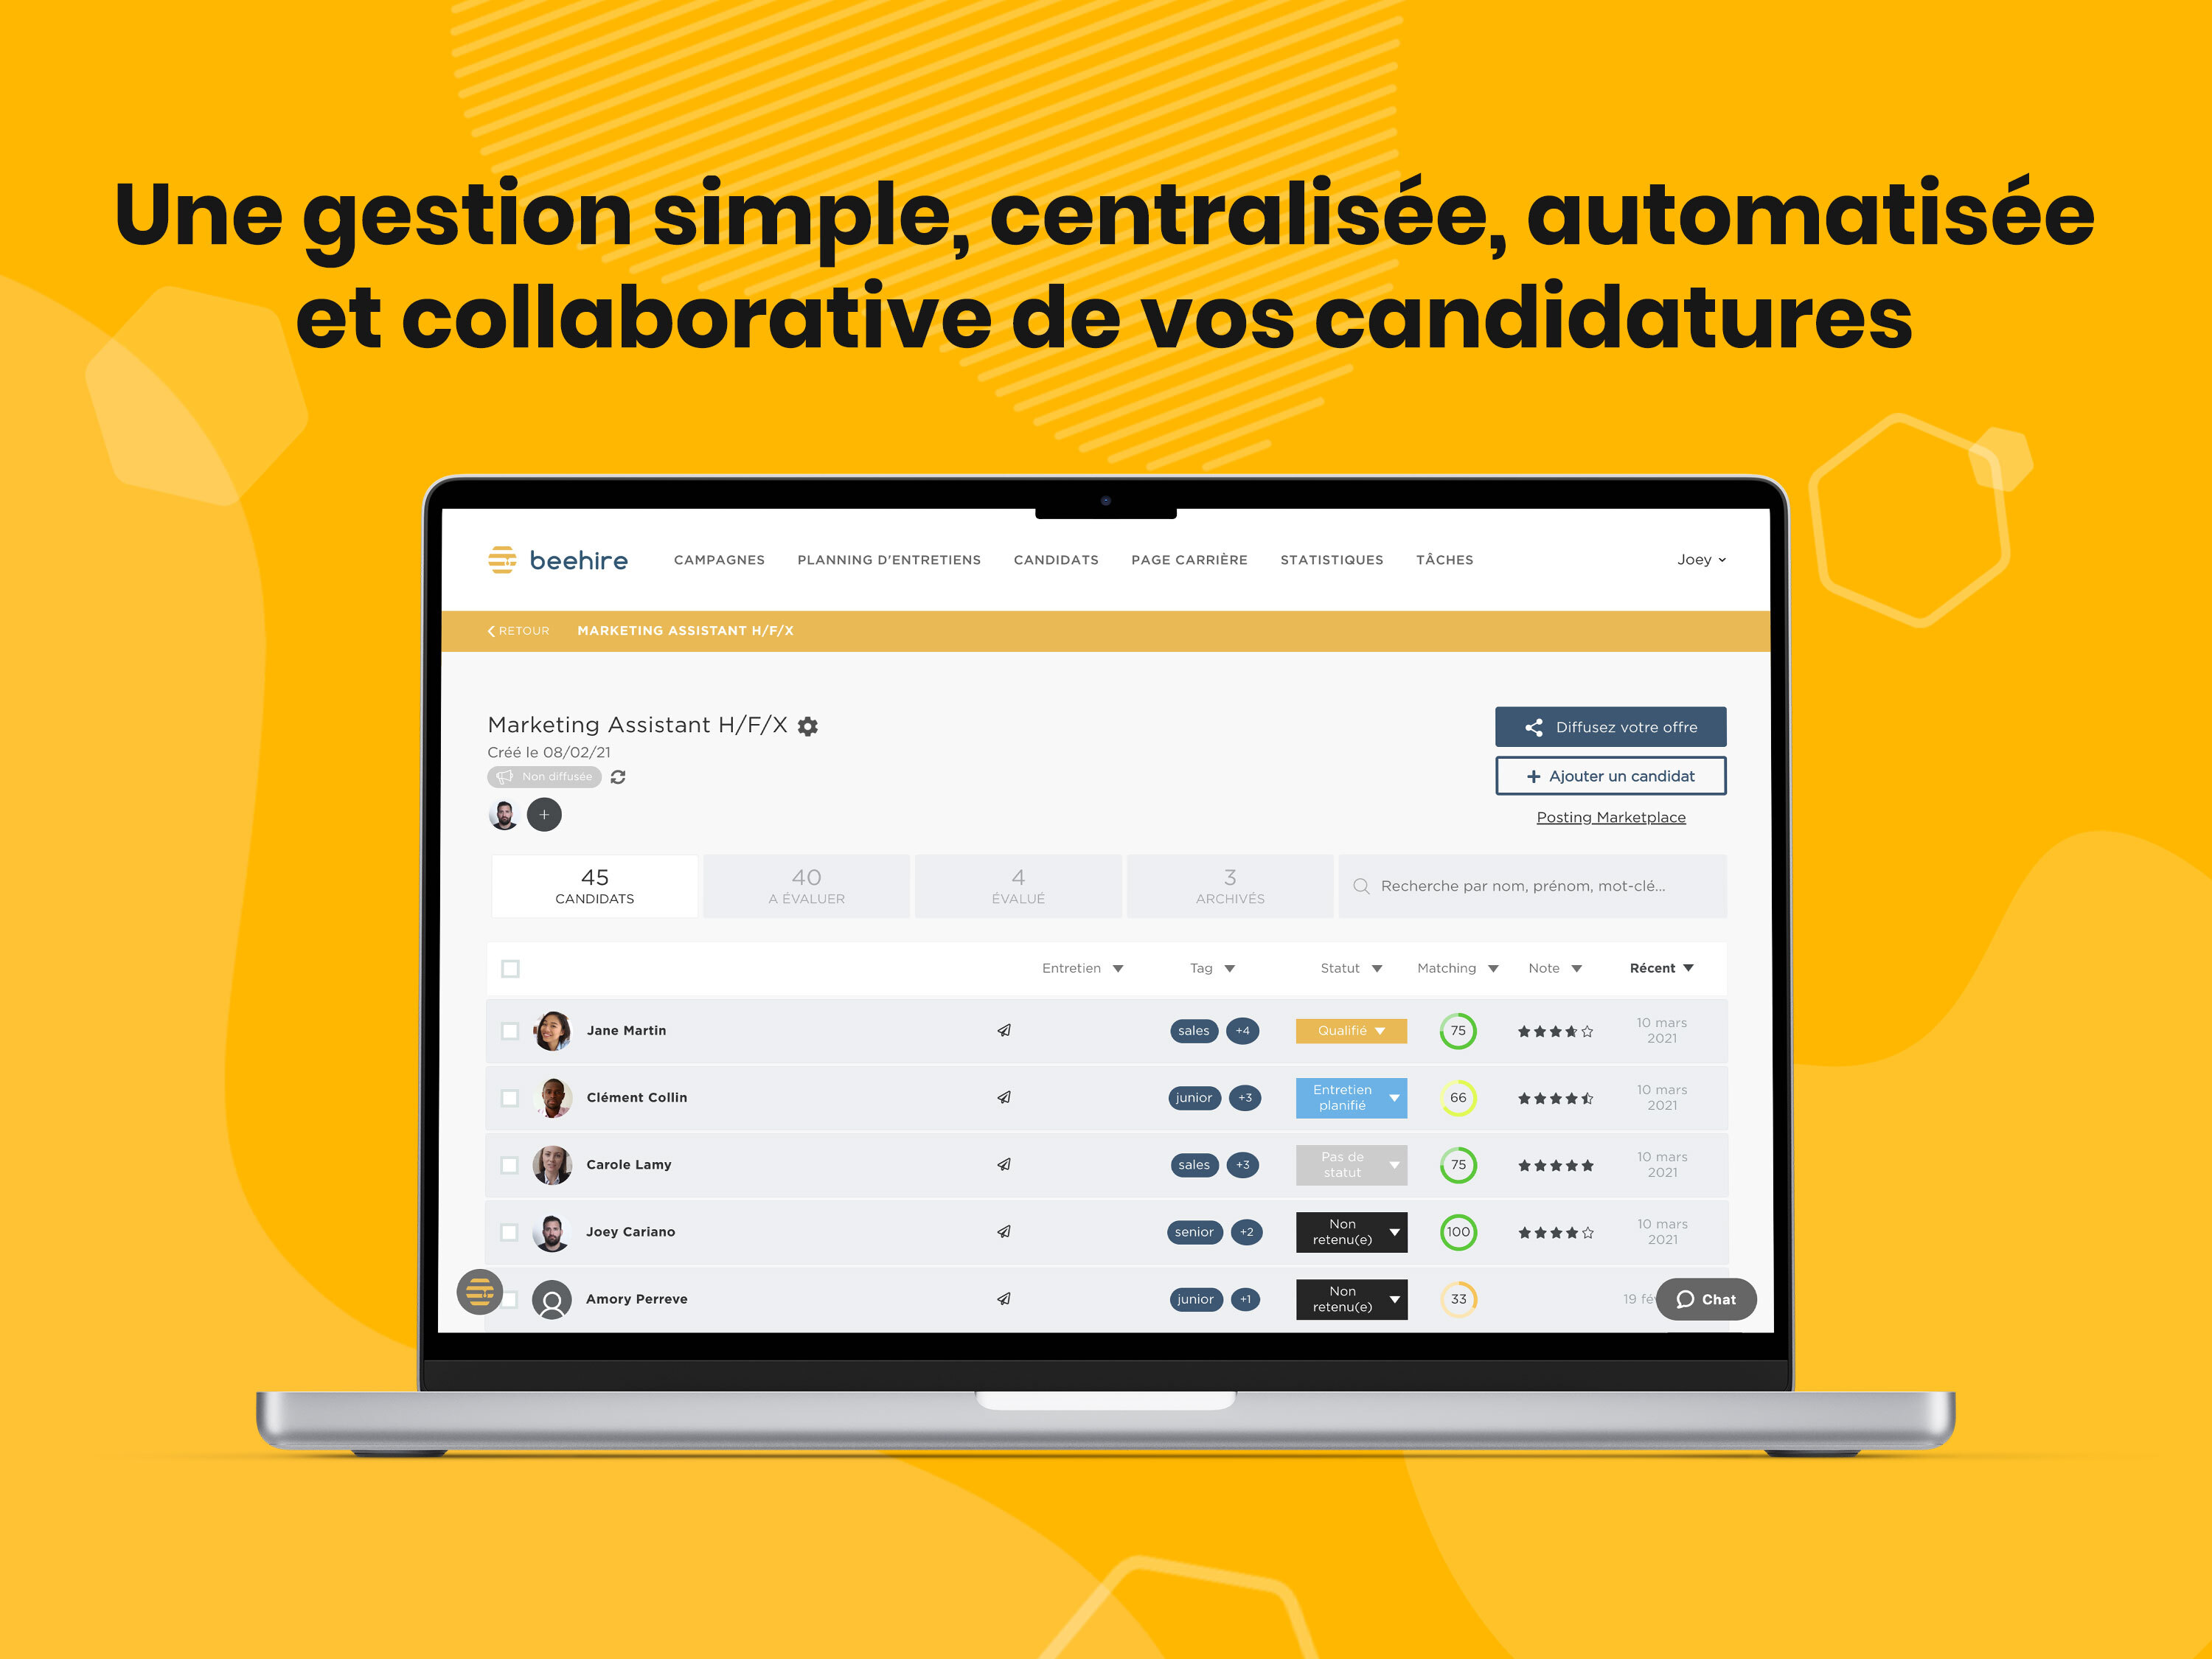 A simple, centralized, automated, and collaborative management of all candidates.